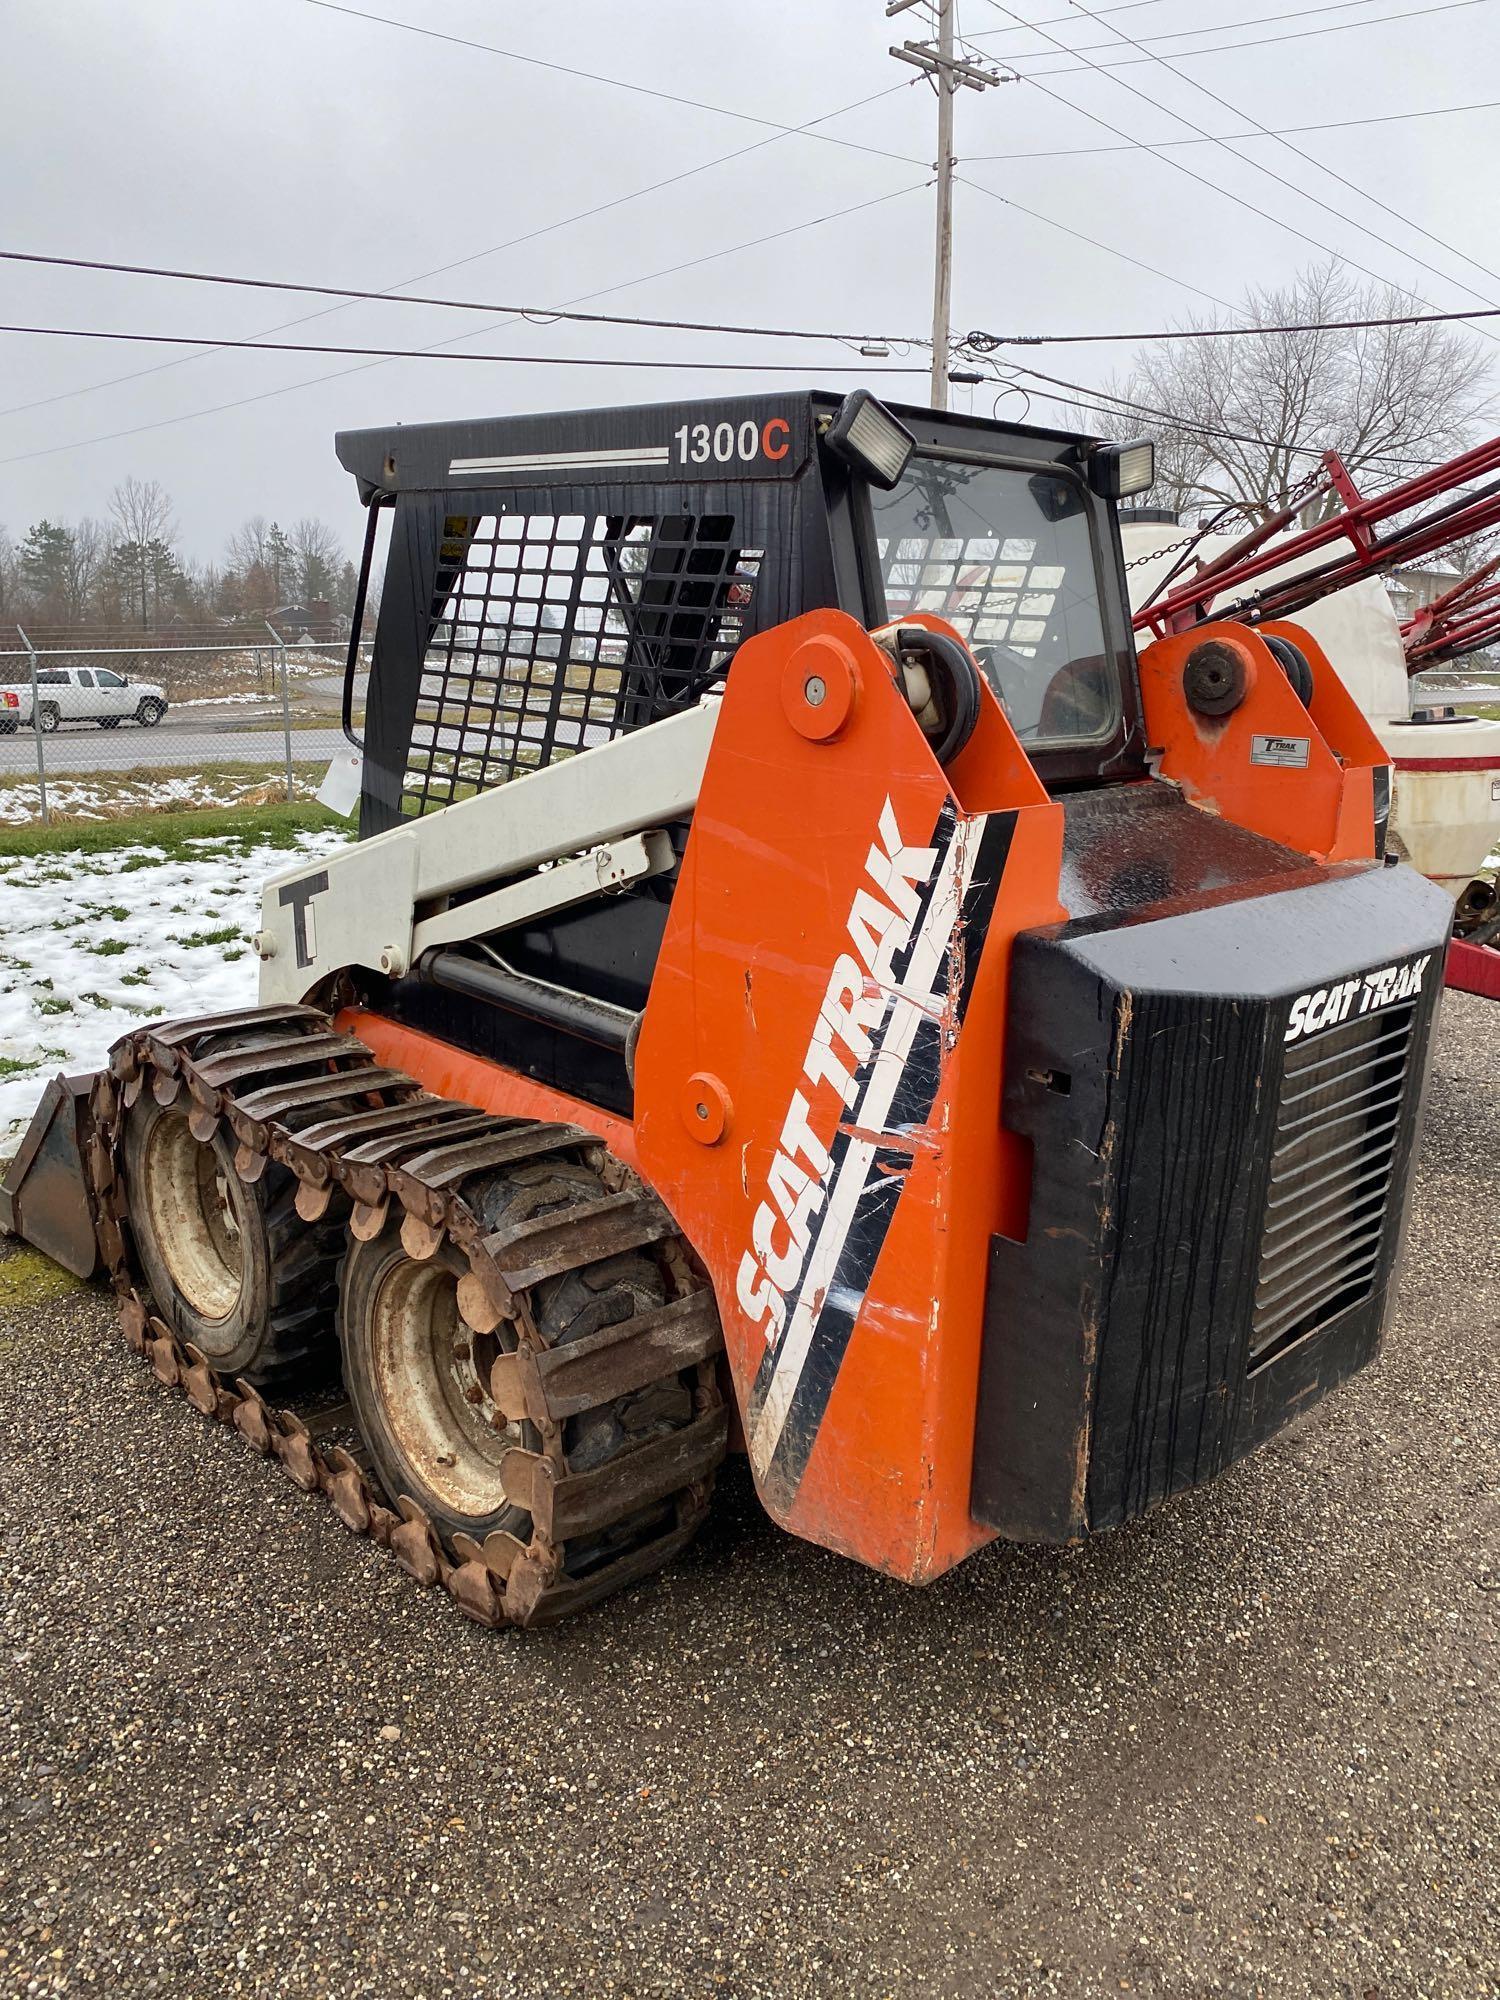 Scat Trak 1300C skid loader with tracks, 1010 hours, Perkins diesel engine, very good condition